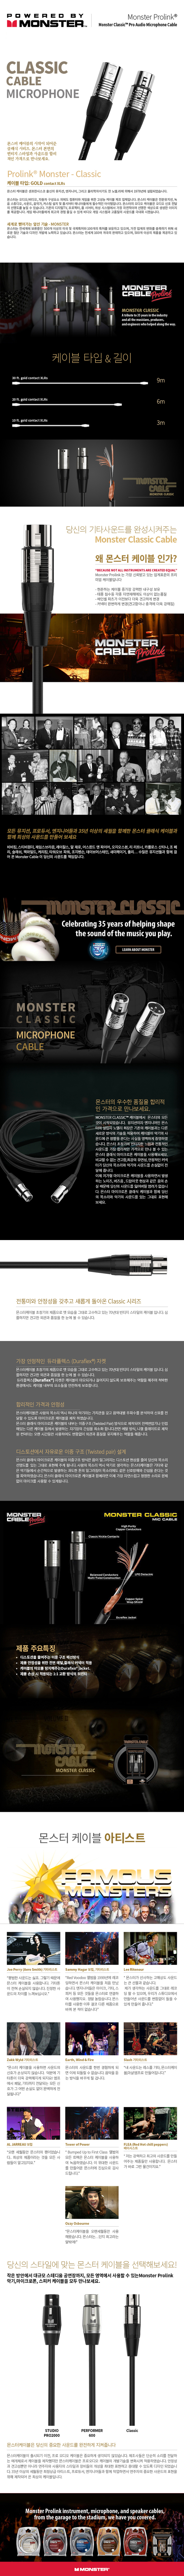 Monster_Classic-MIC-CABLE_170535.jpg